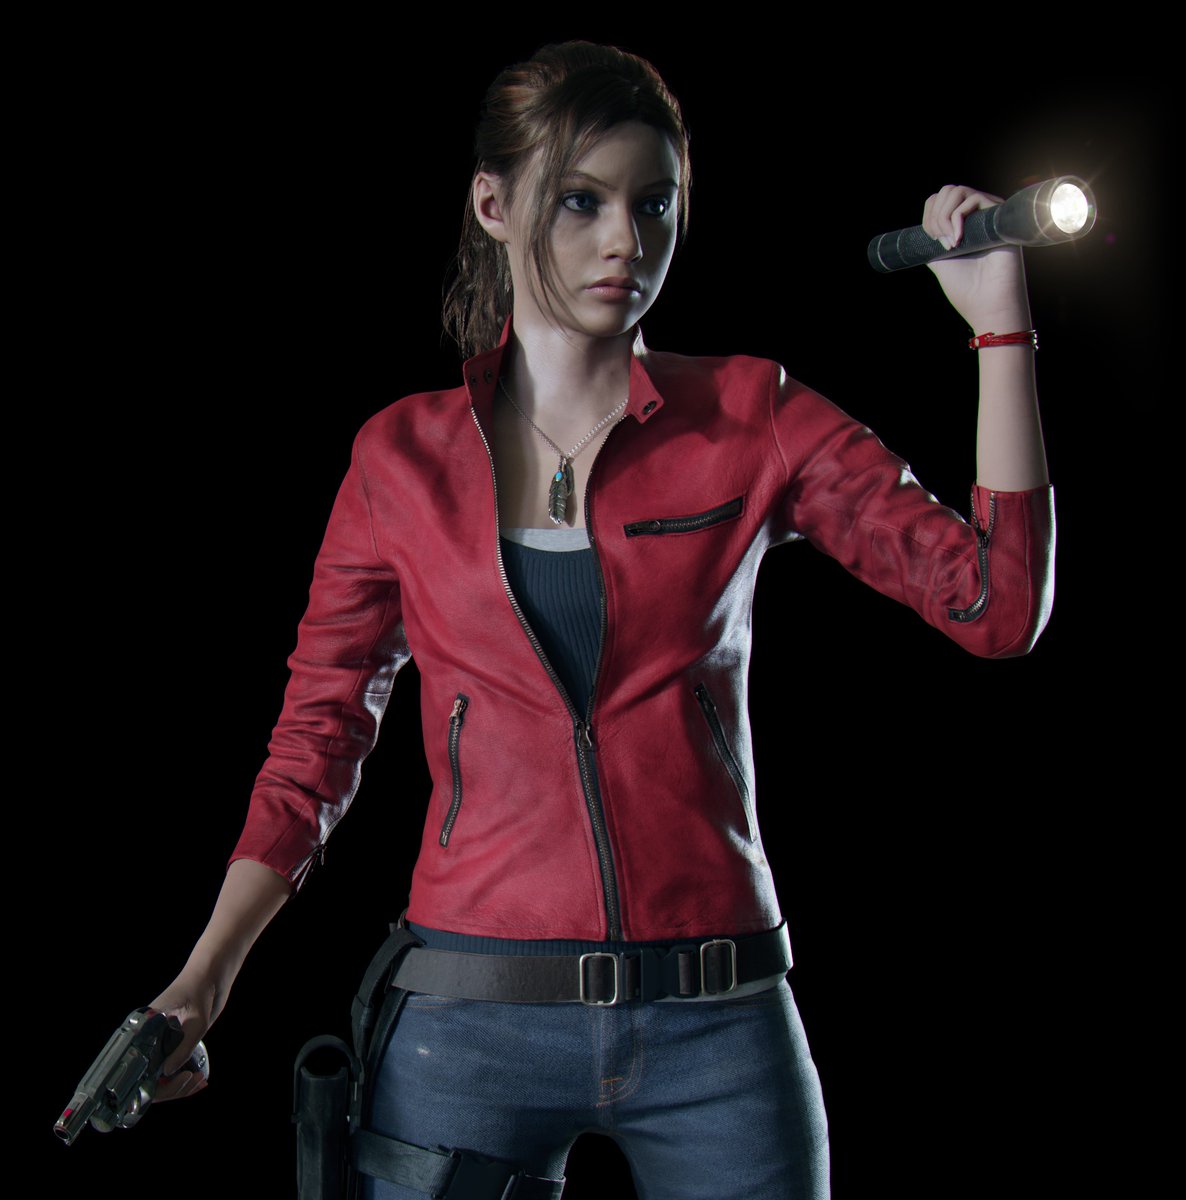 Claire Redfield is POWERFUL.